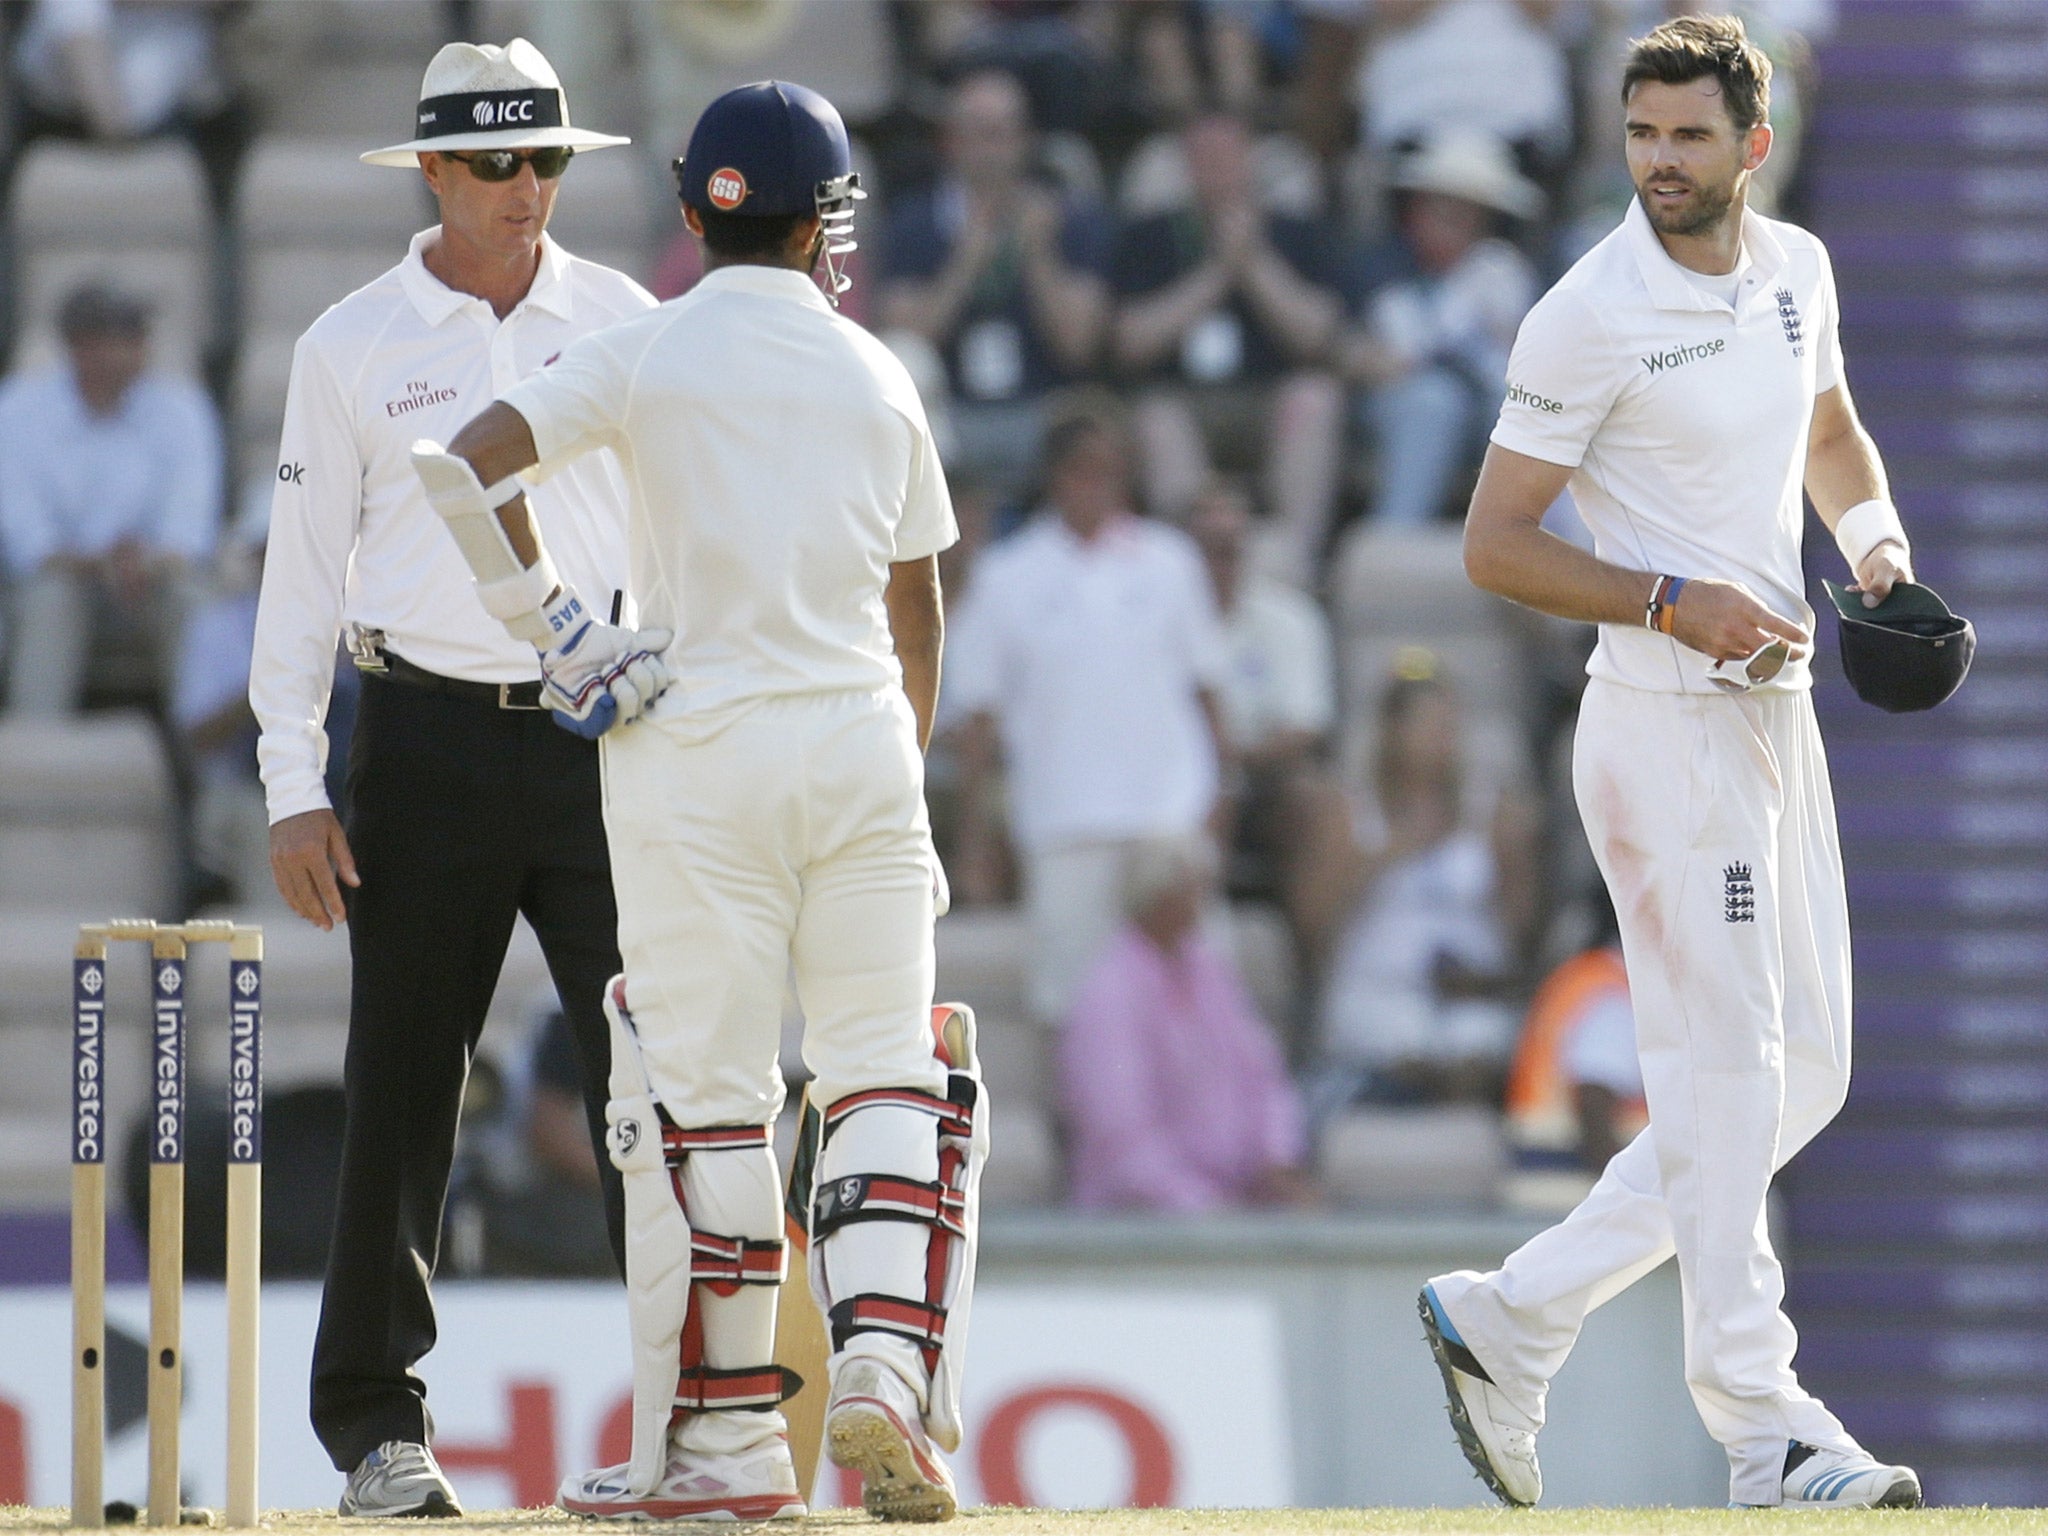 James Anderson exchanges words with the India batsman Ajinkya Rahane at the end of play